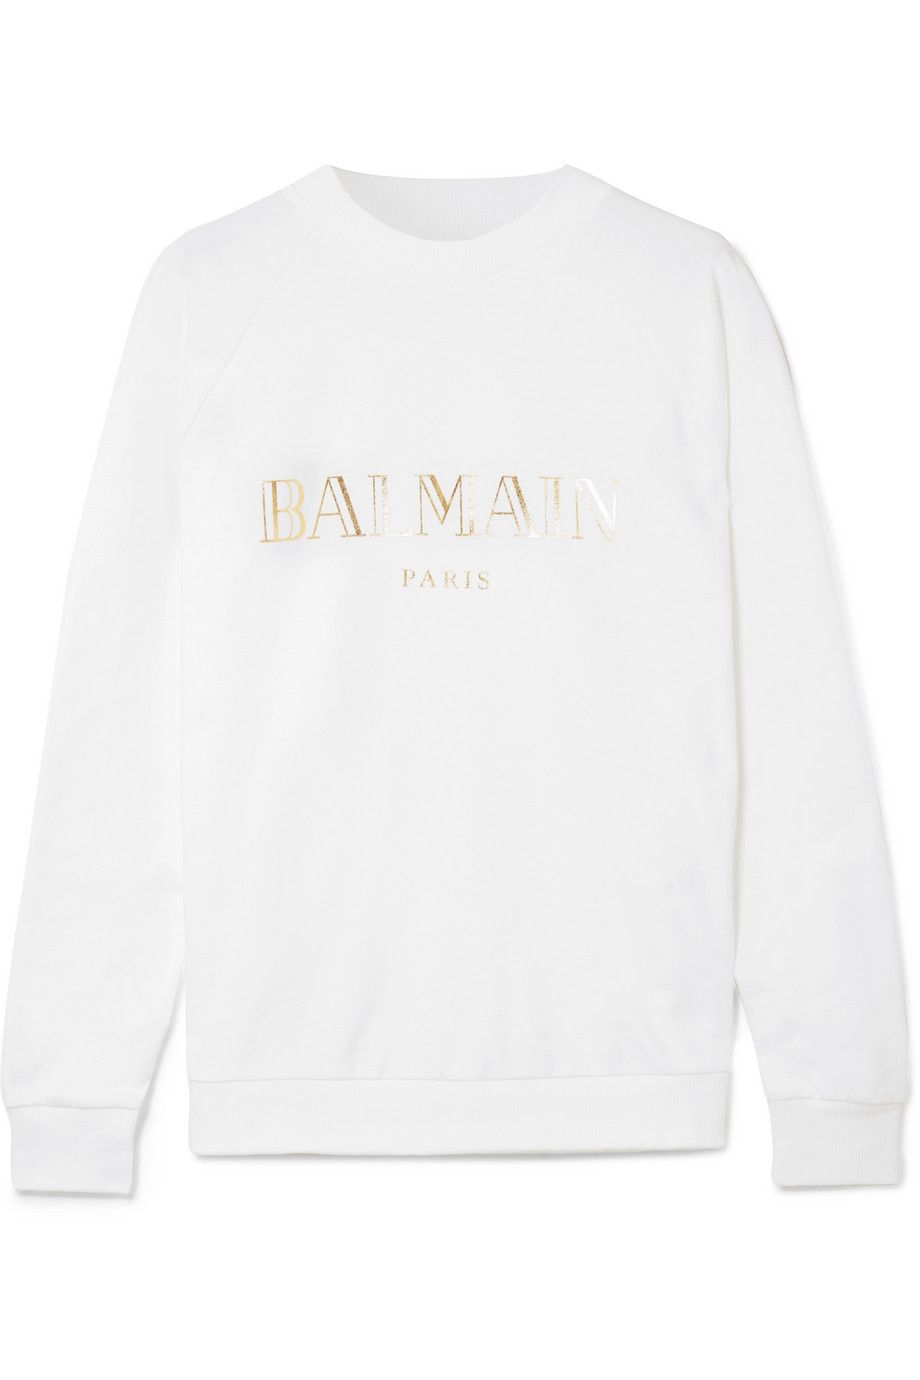 Clothing, White, Long-sleeved t-shirt, Sleeve, Sweater, T-shirt, Sweatshirt, Text, Top, Outerwear, 